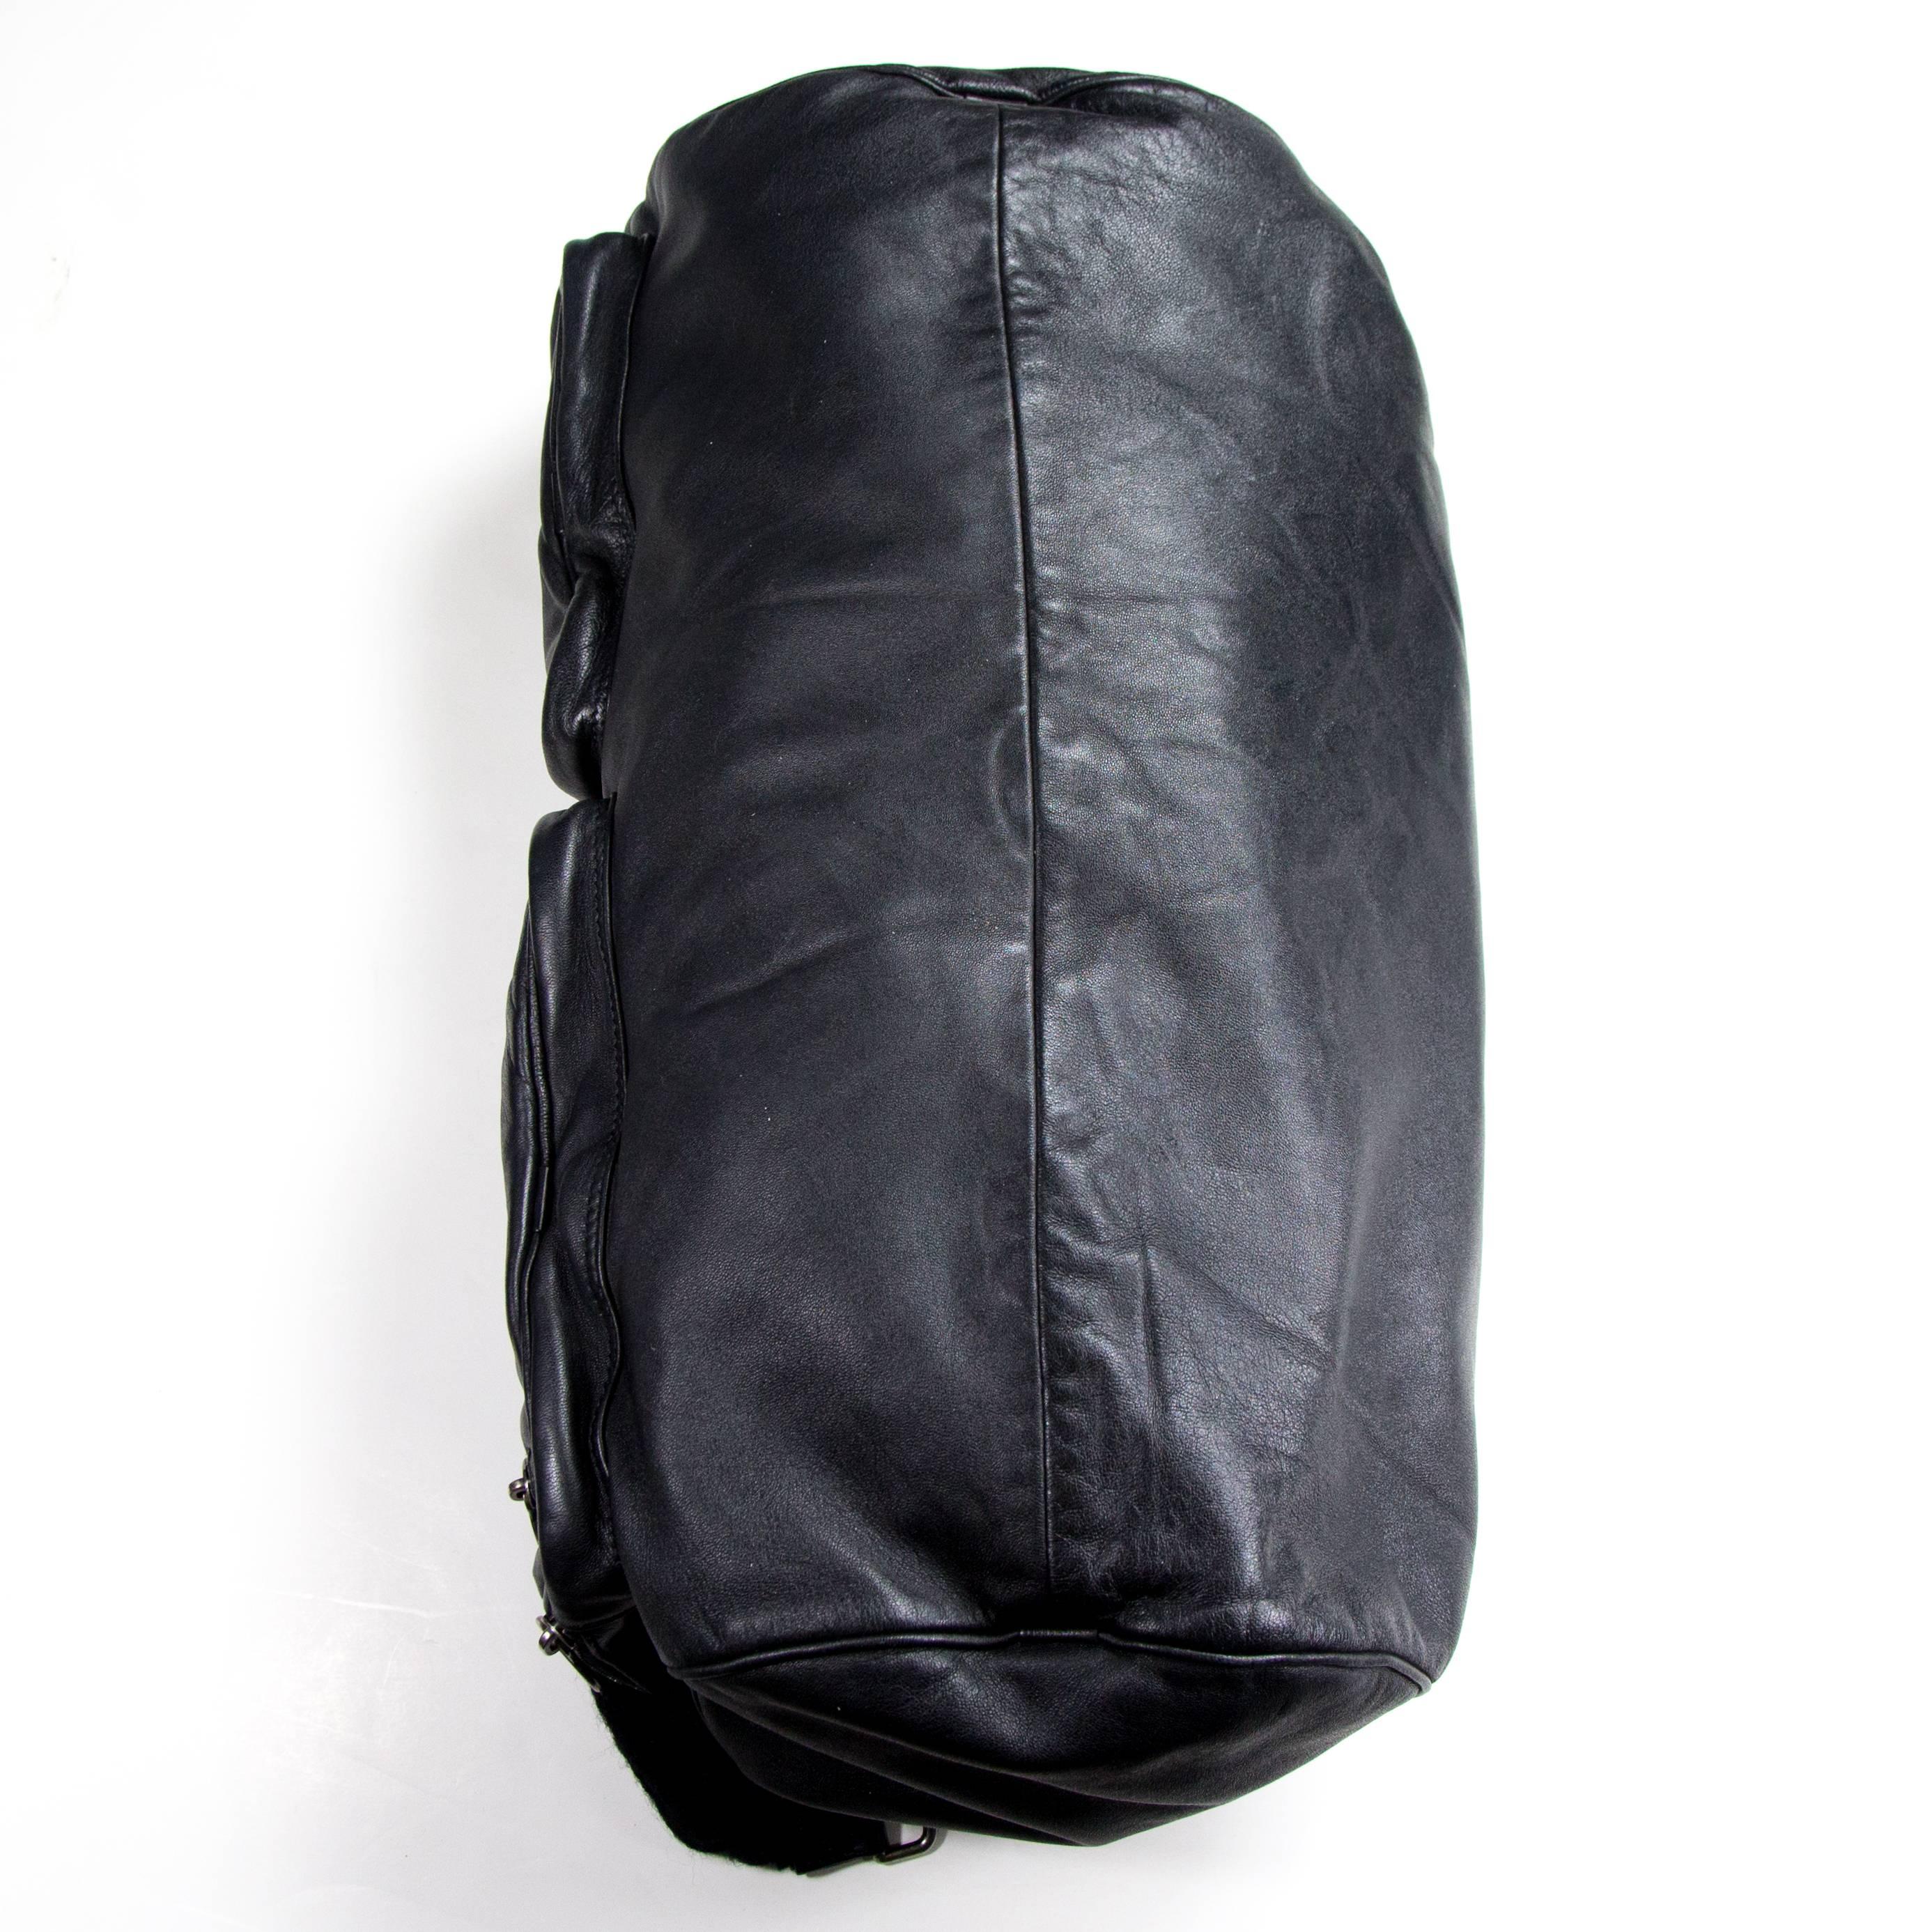 Dior Homme Duffle Leather Bag - Black Tassel Weekend Travel Gym Delville Hedi In Good Condition In Prahran, Victoria